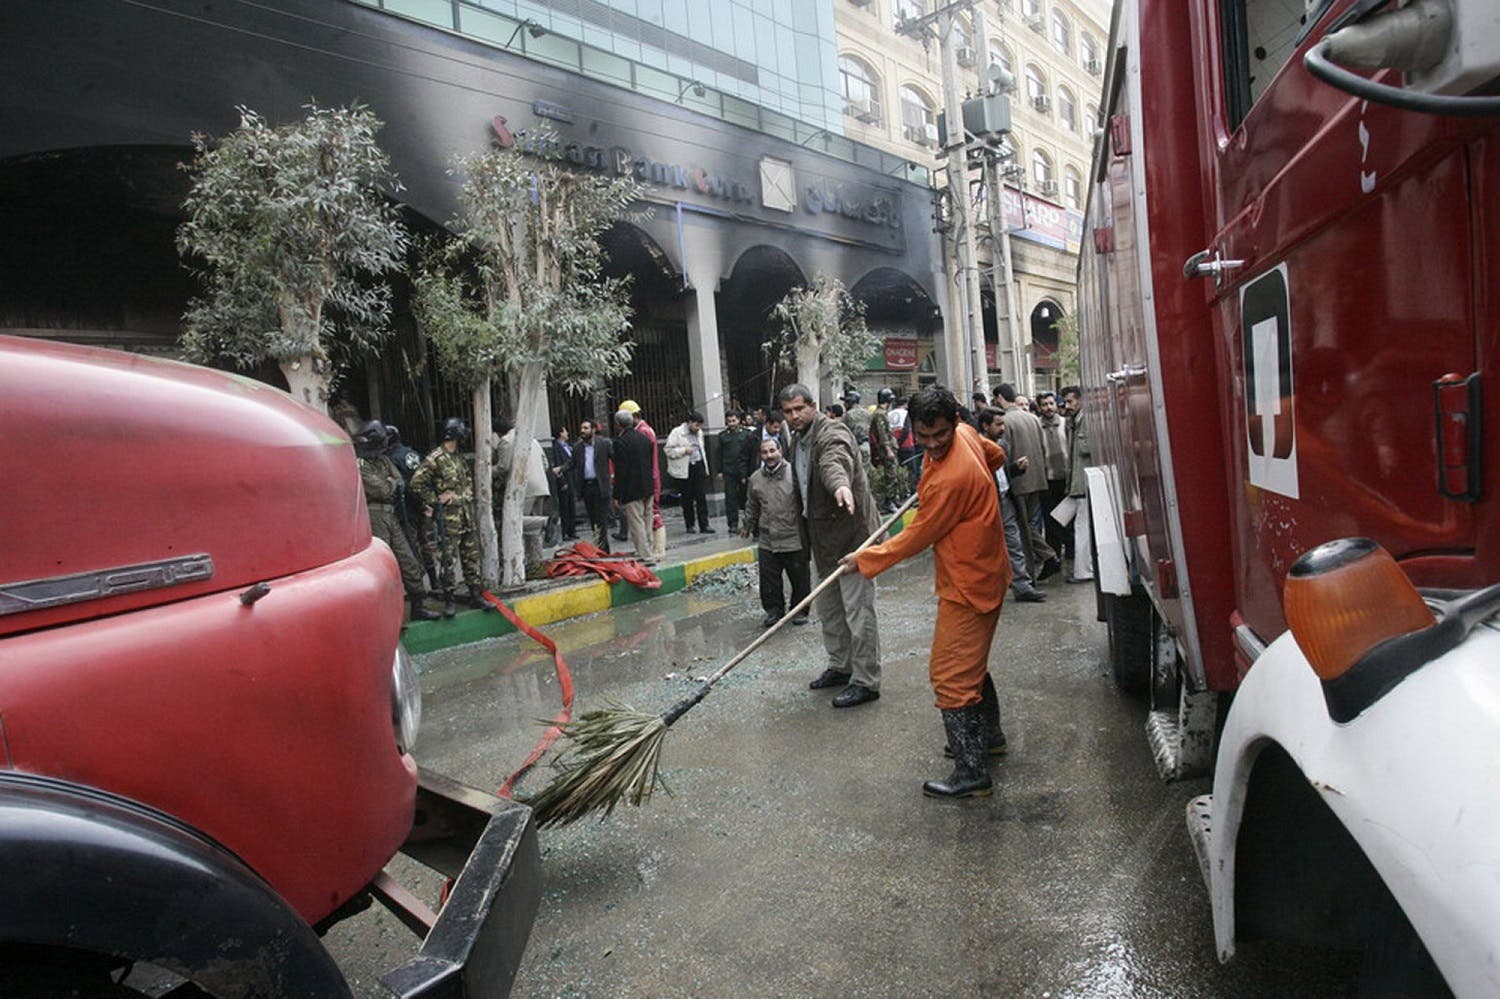 Iranian rescuers clean the scene of a bomb attack in Ahwaz where a scheduled visit by President Mahmoud Ahmadinejad had been cancelled at the last minute, 24 January 2006. (File photo: AFP)